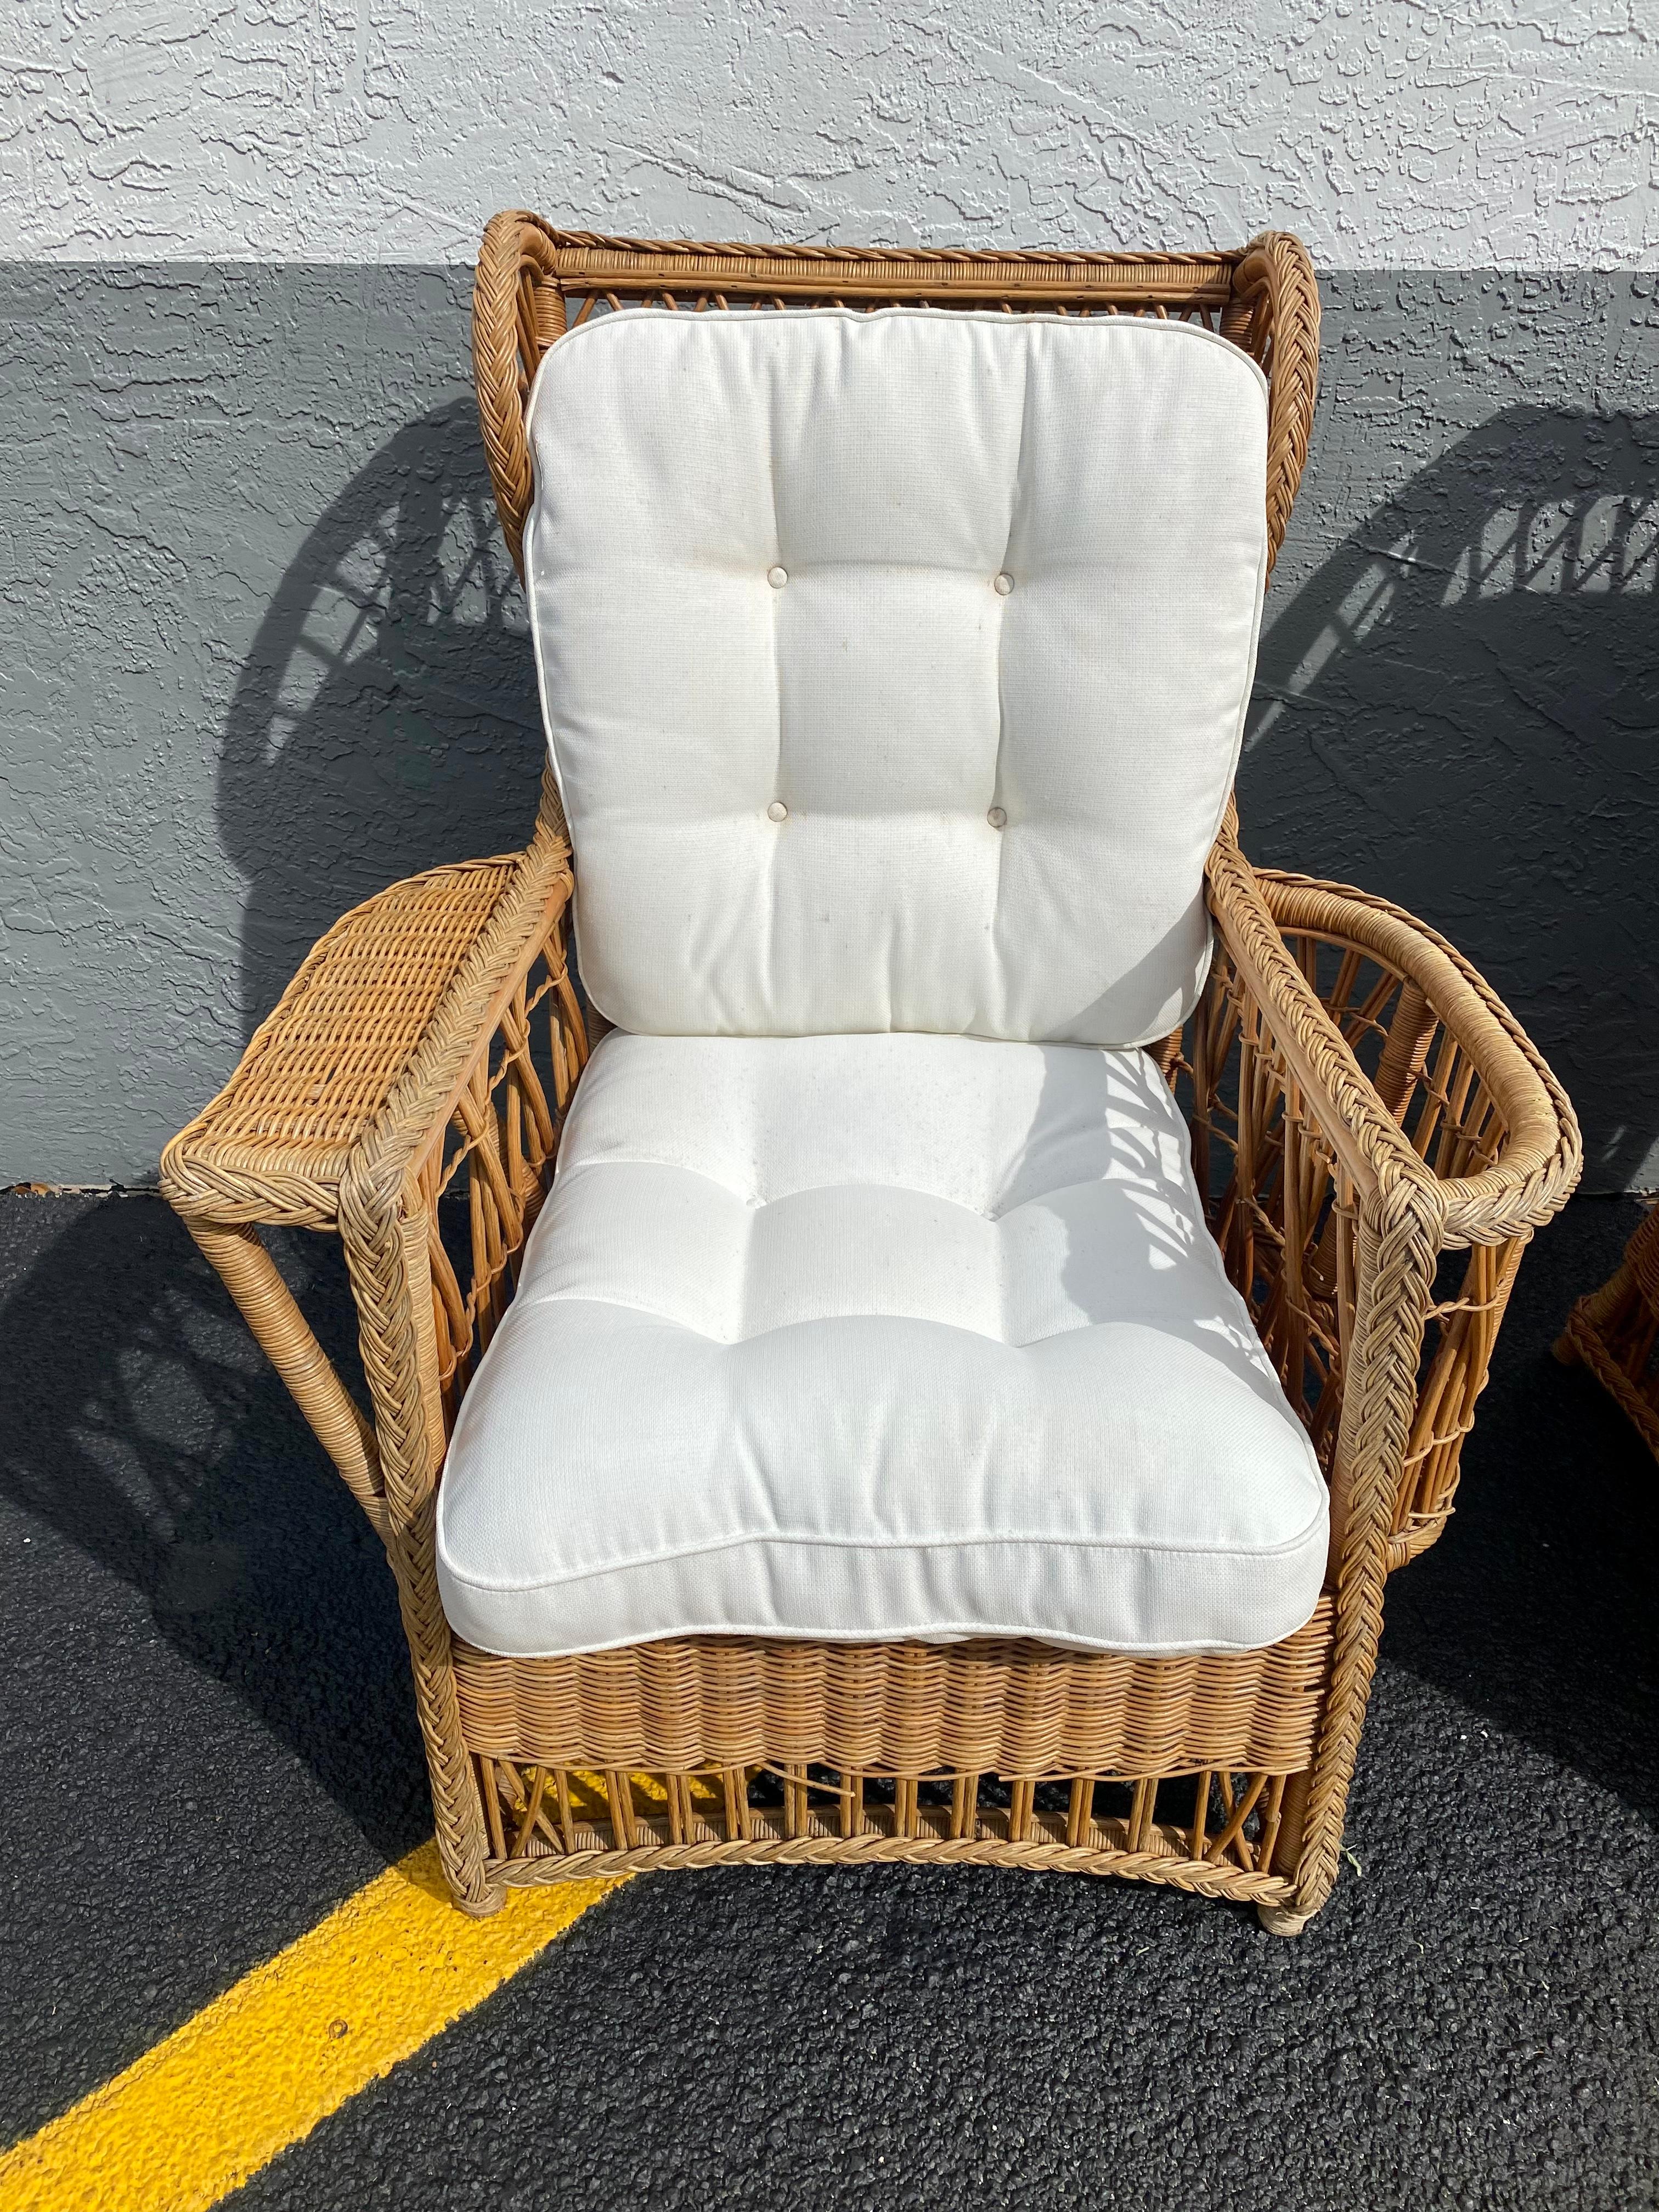 Upholstery 1960s President Sculptural Wingback Rattan Chairs, Set of 4 For Sale